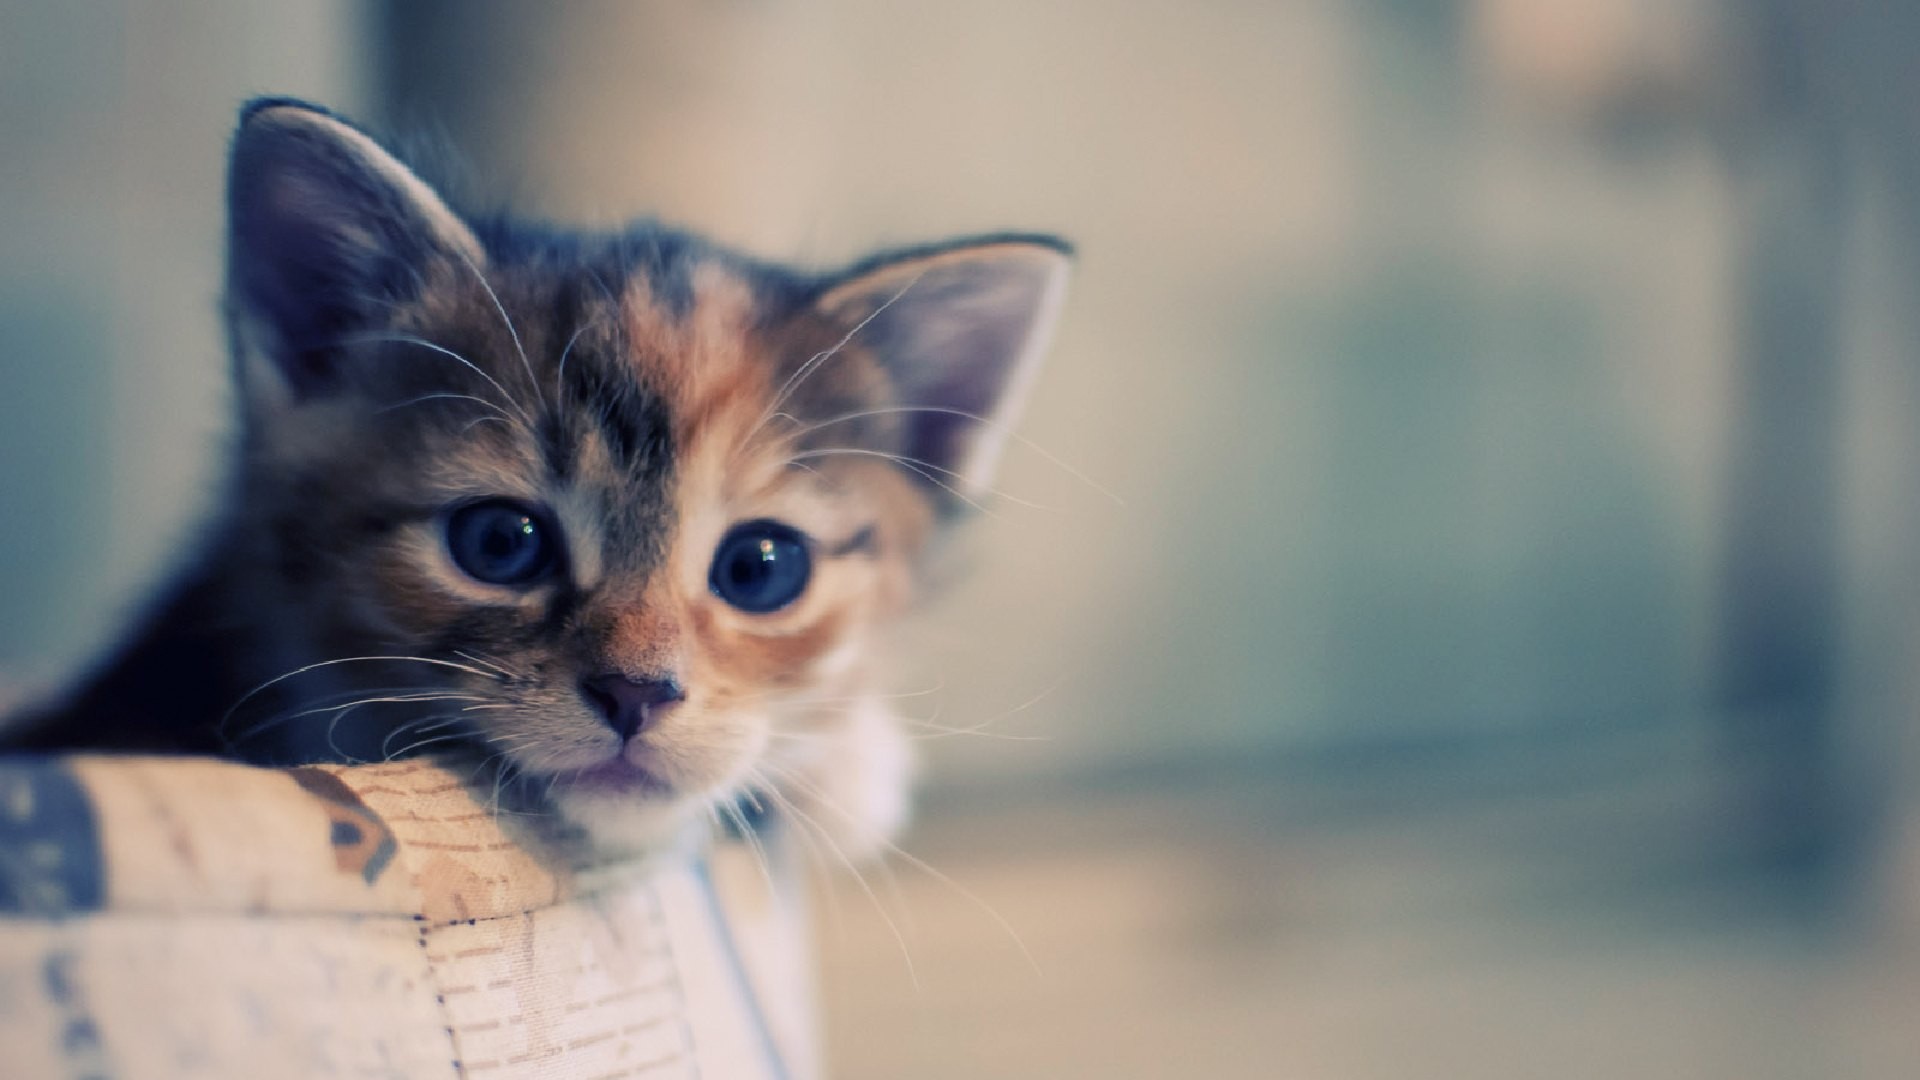 To Click On Cute Cat HD Wallpaper Background Then Choose Save